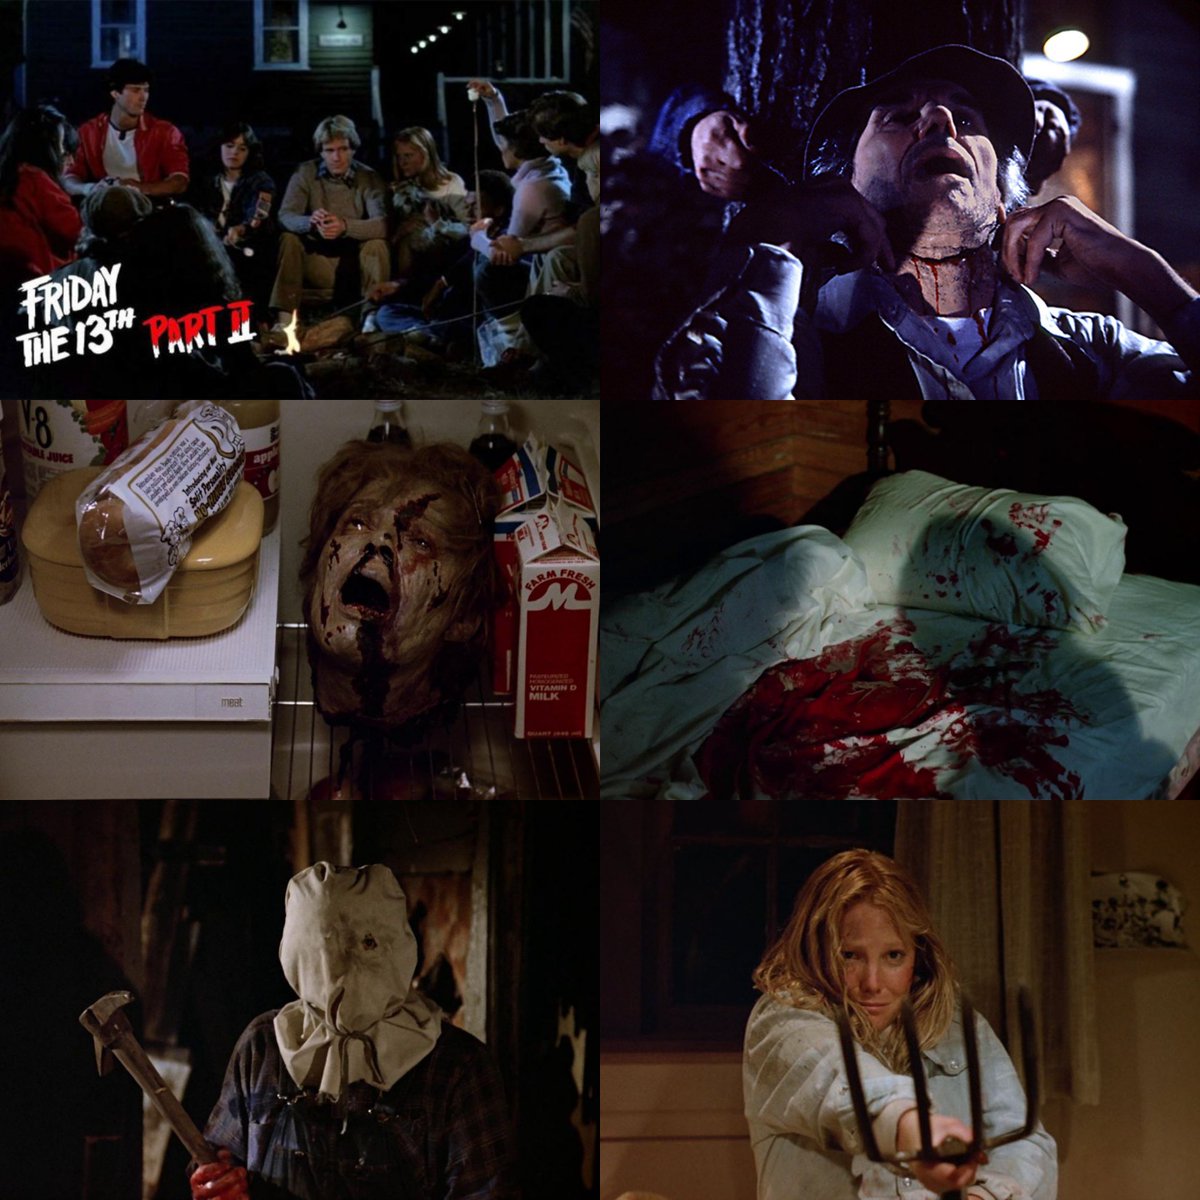 Friday the 13th Part 2 (1981) 
Directed by Steve Miner